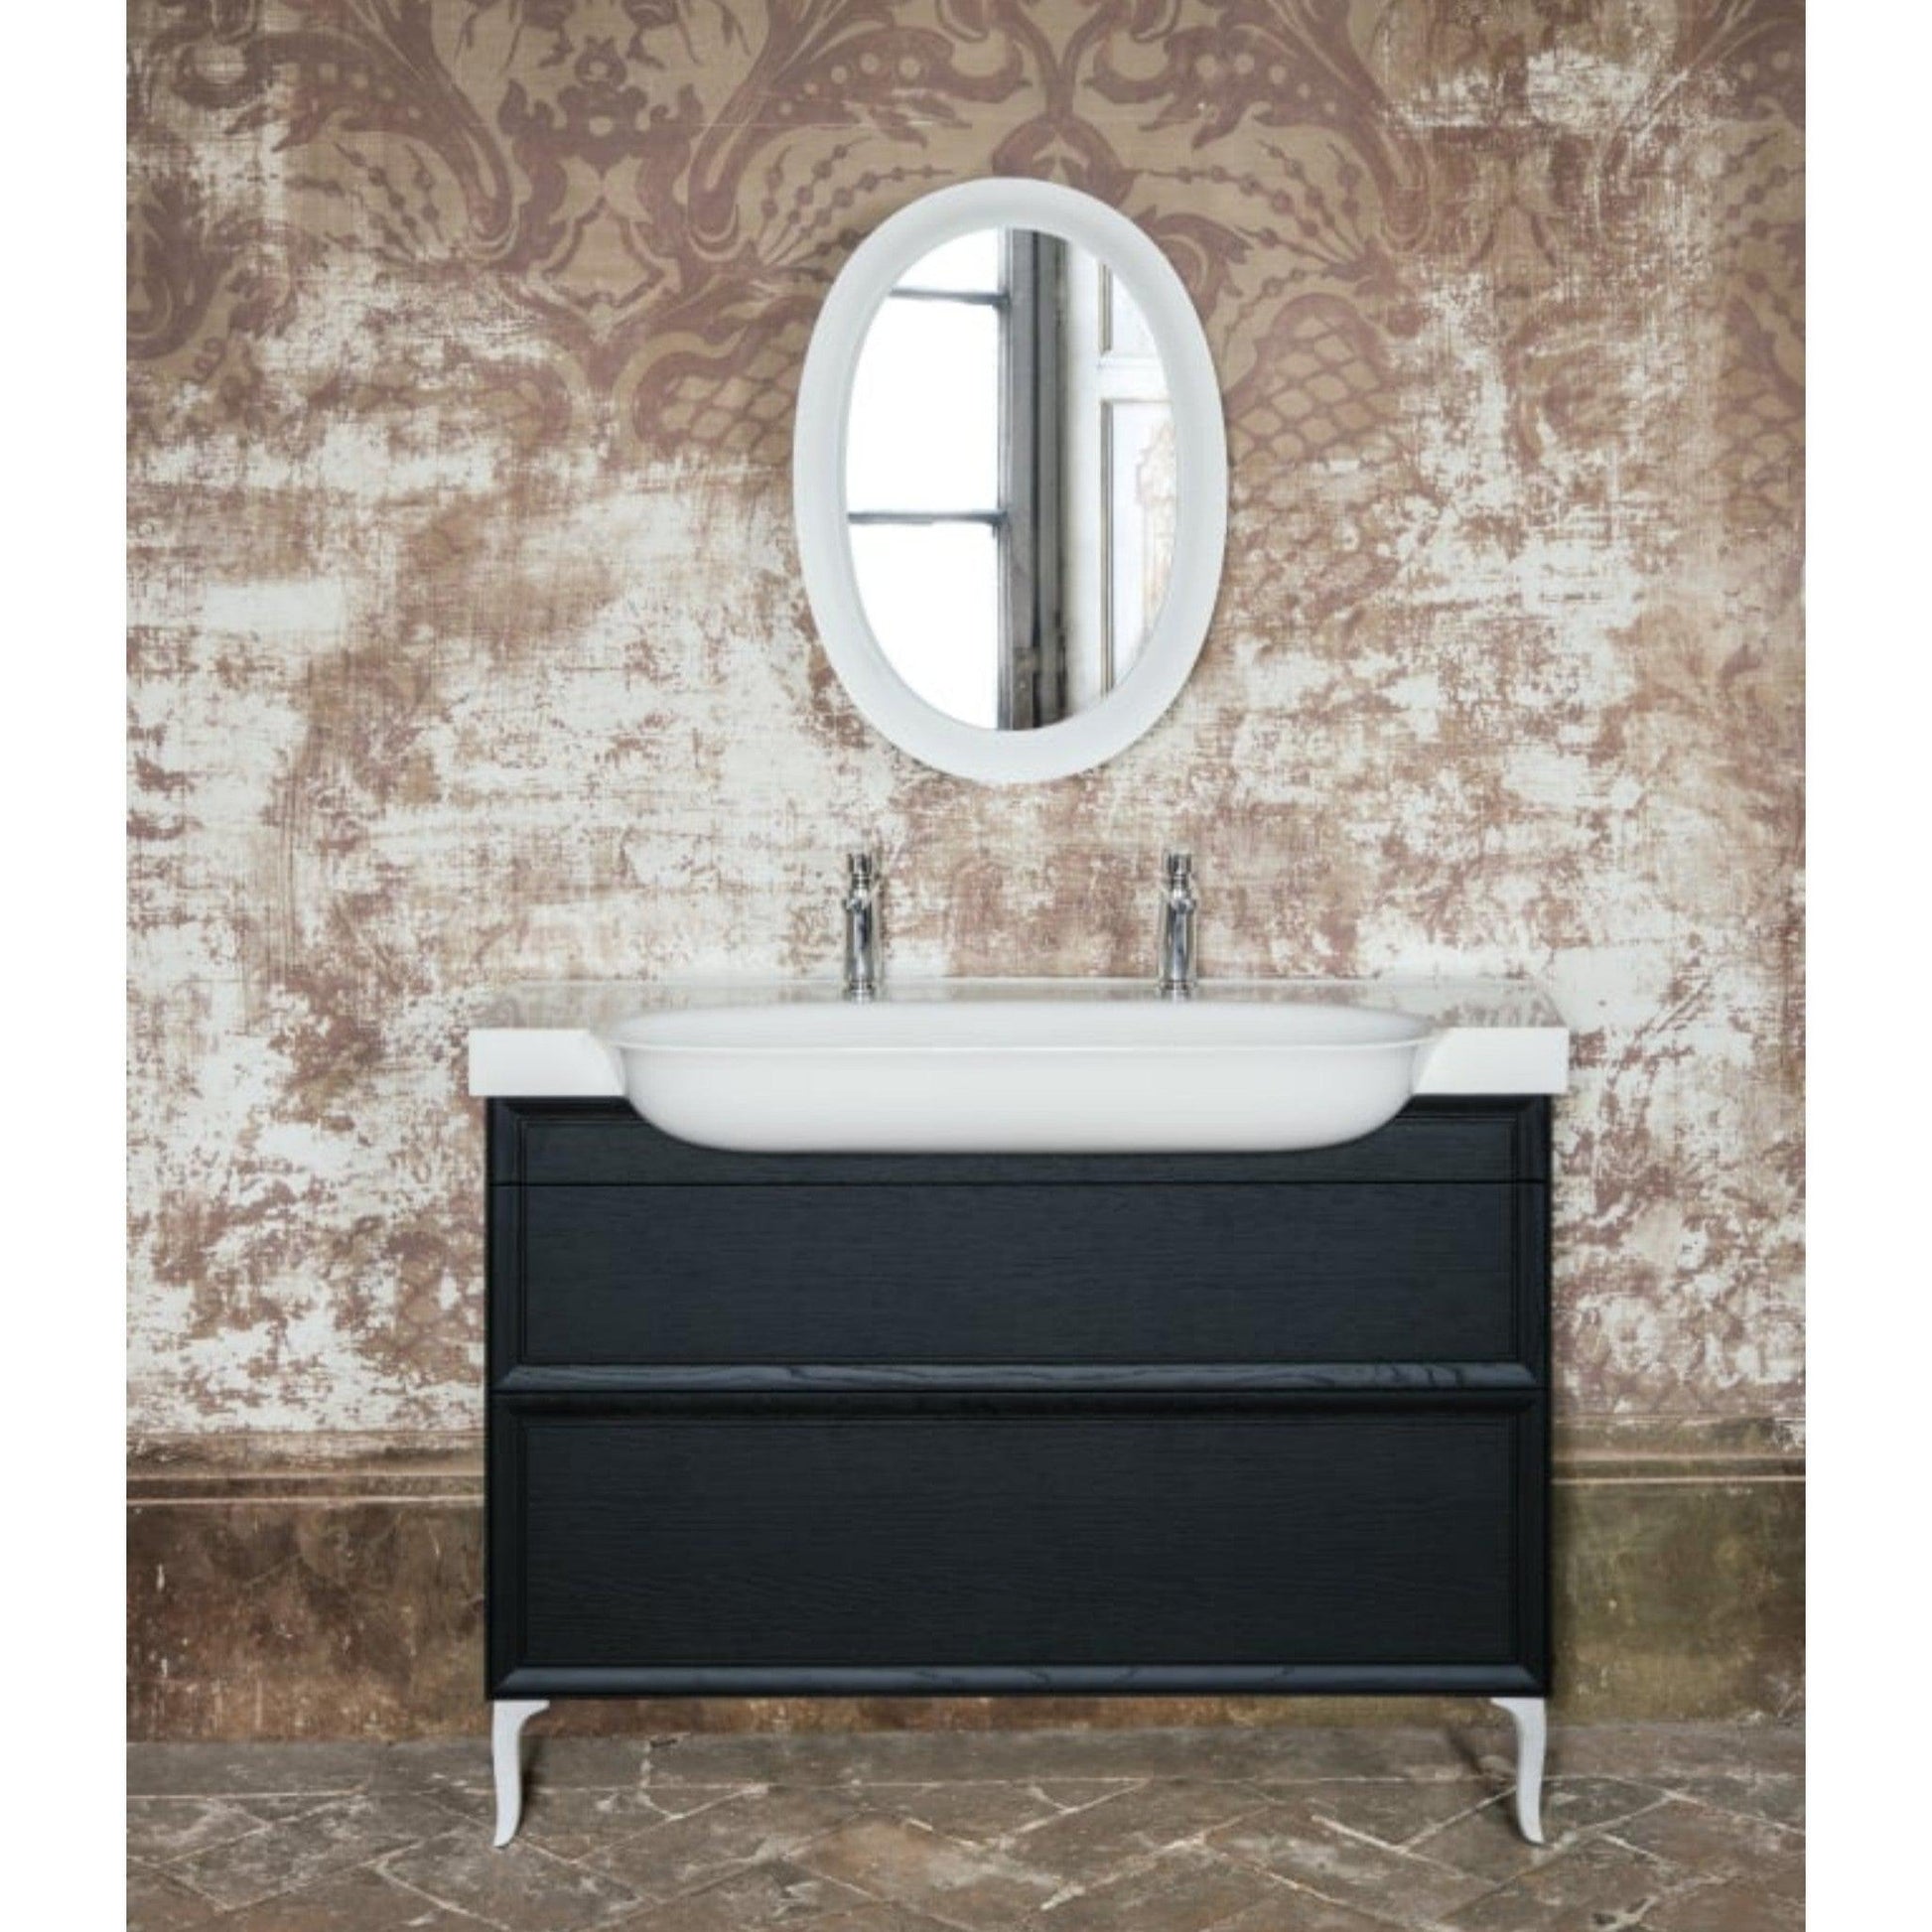 Laufen New Classic 46" 2-Drawer Blacked Oak Wall-Mounted Vanity for New Classic Bathroom Sink Model: H813858